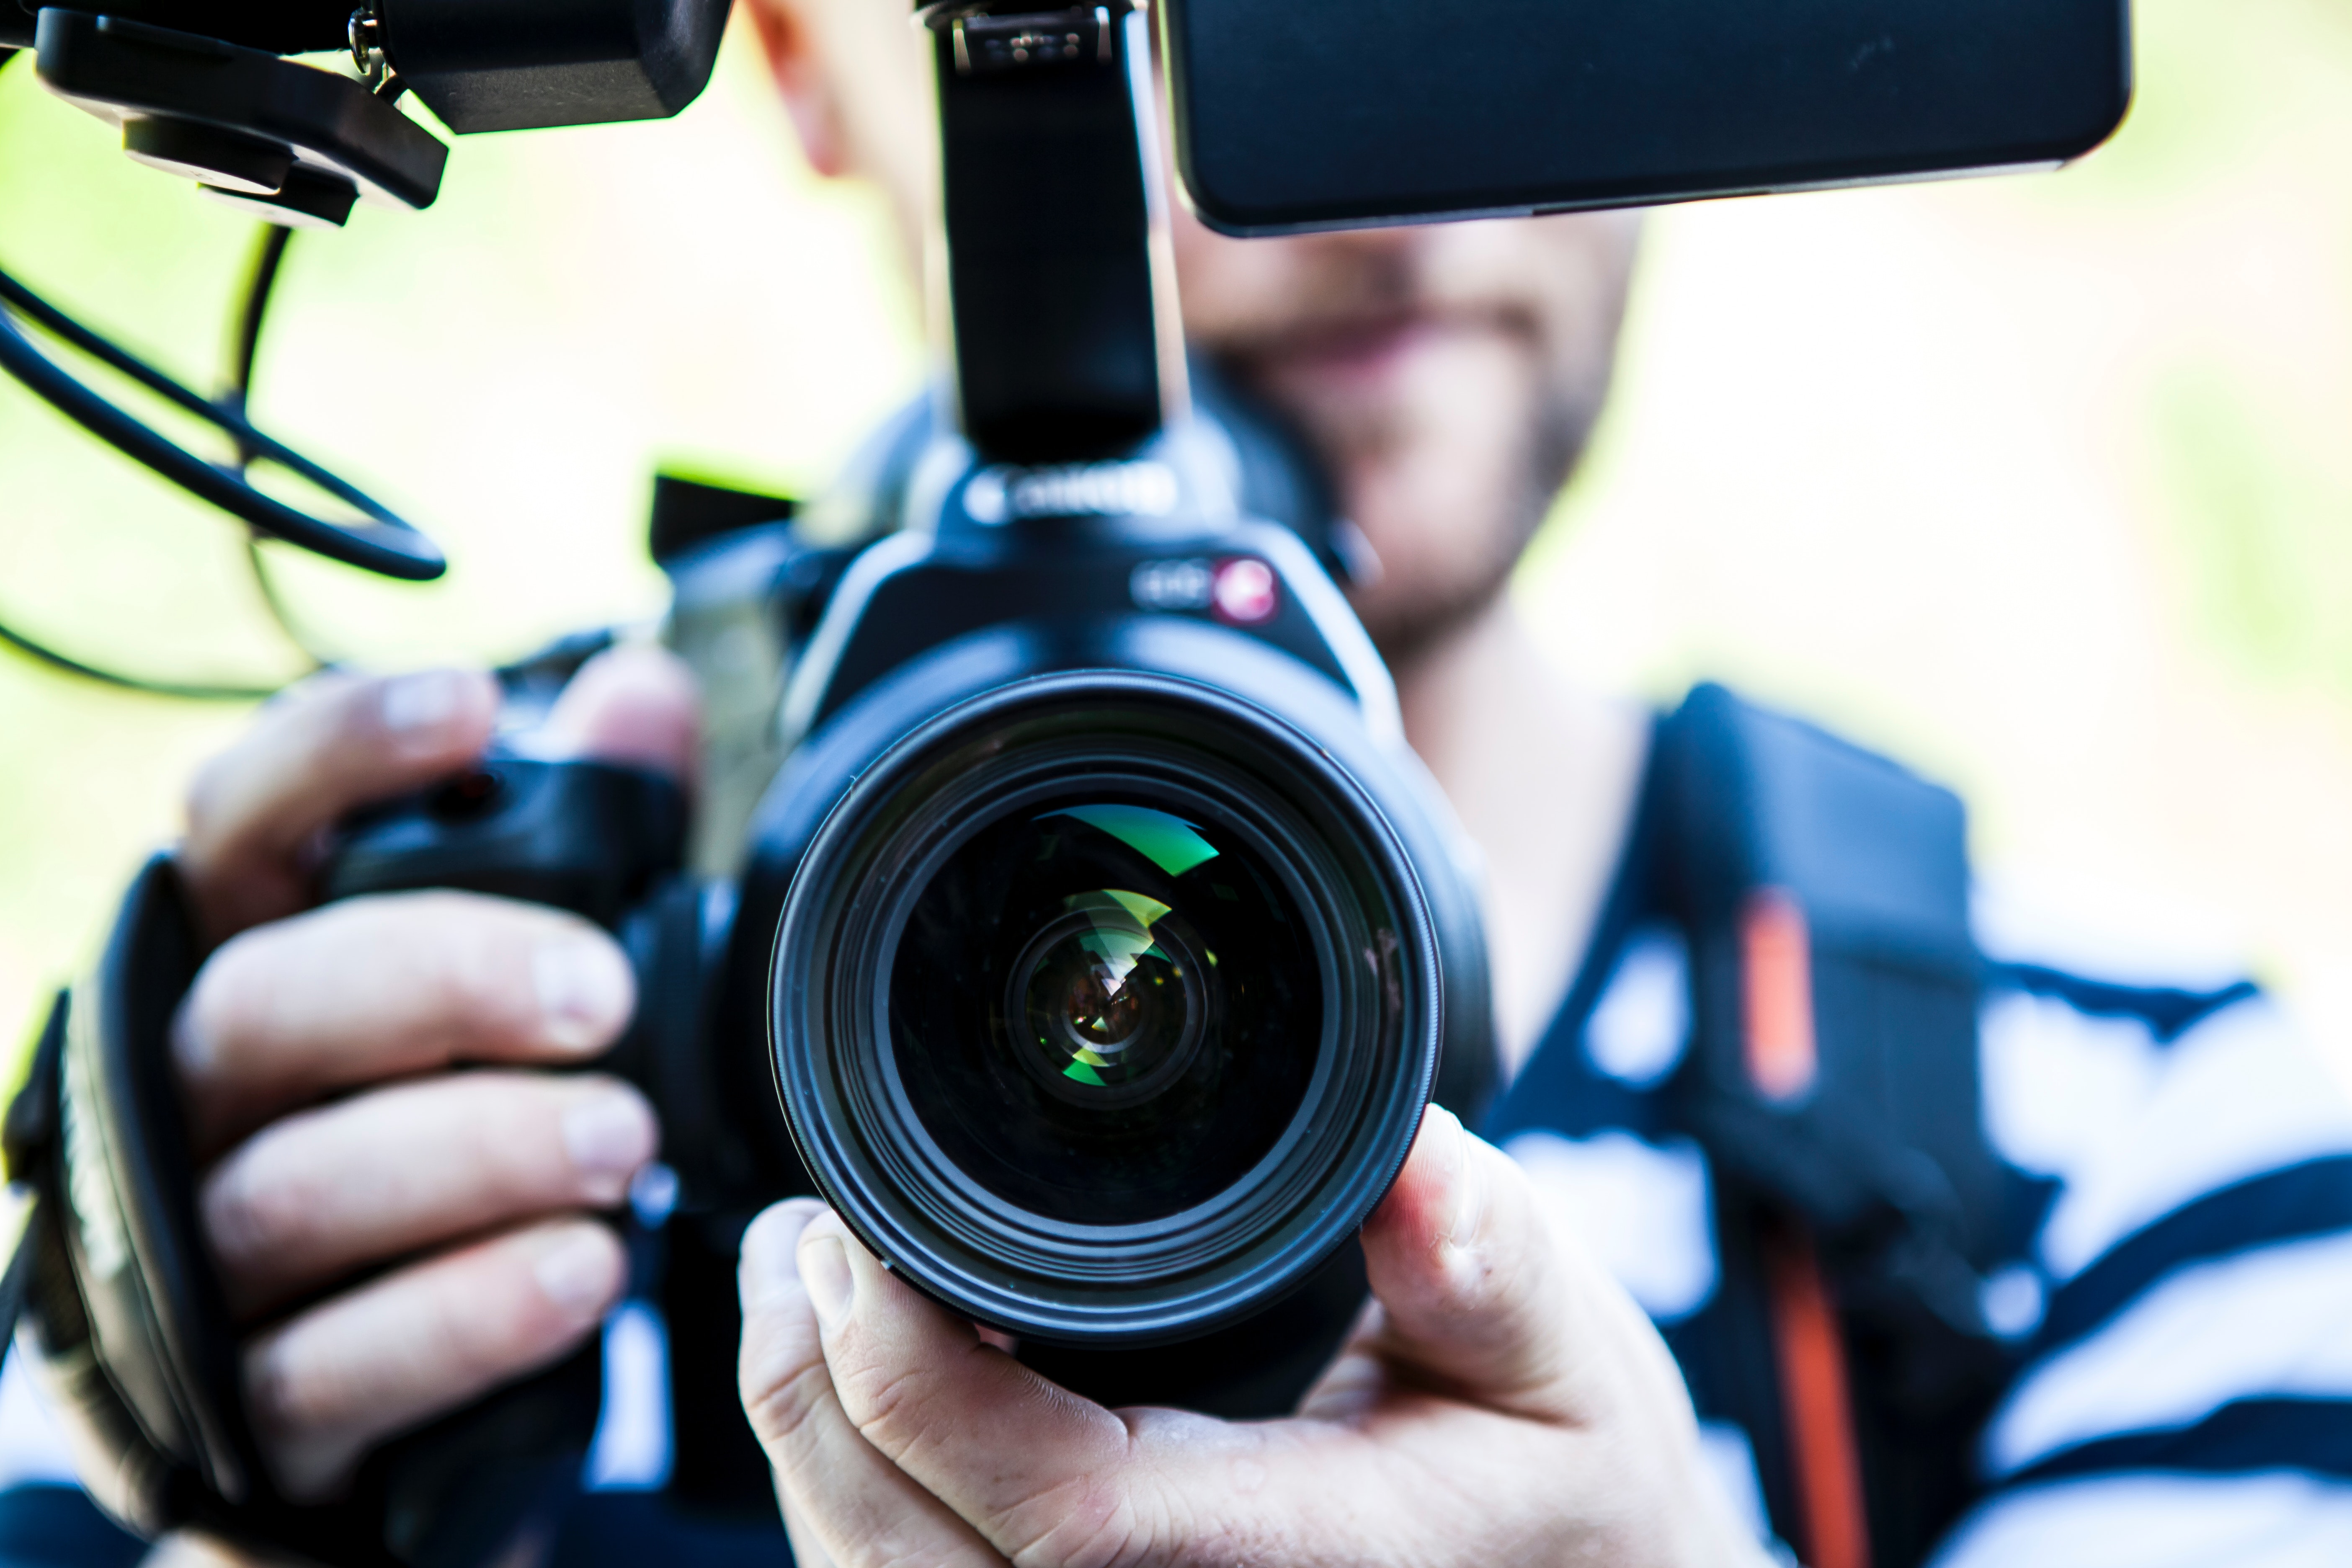 How to Repurpose Blog Content for Video: 10 Steps to Shareable Content